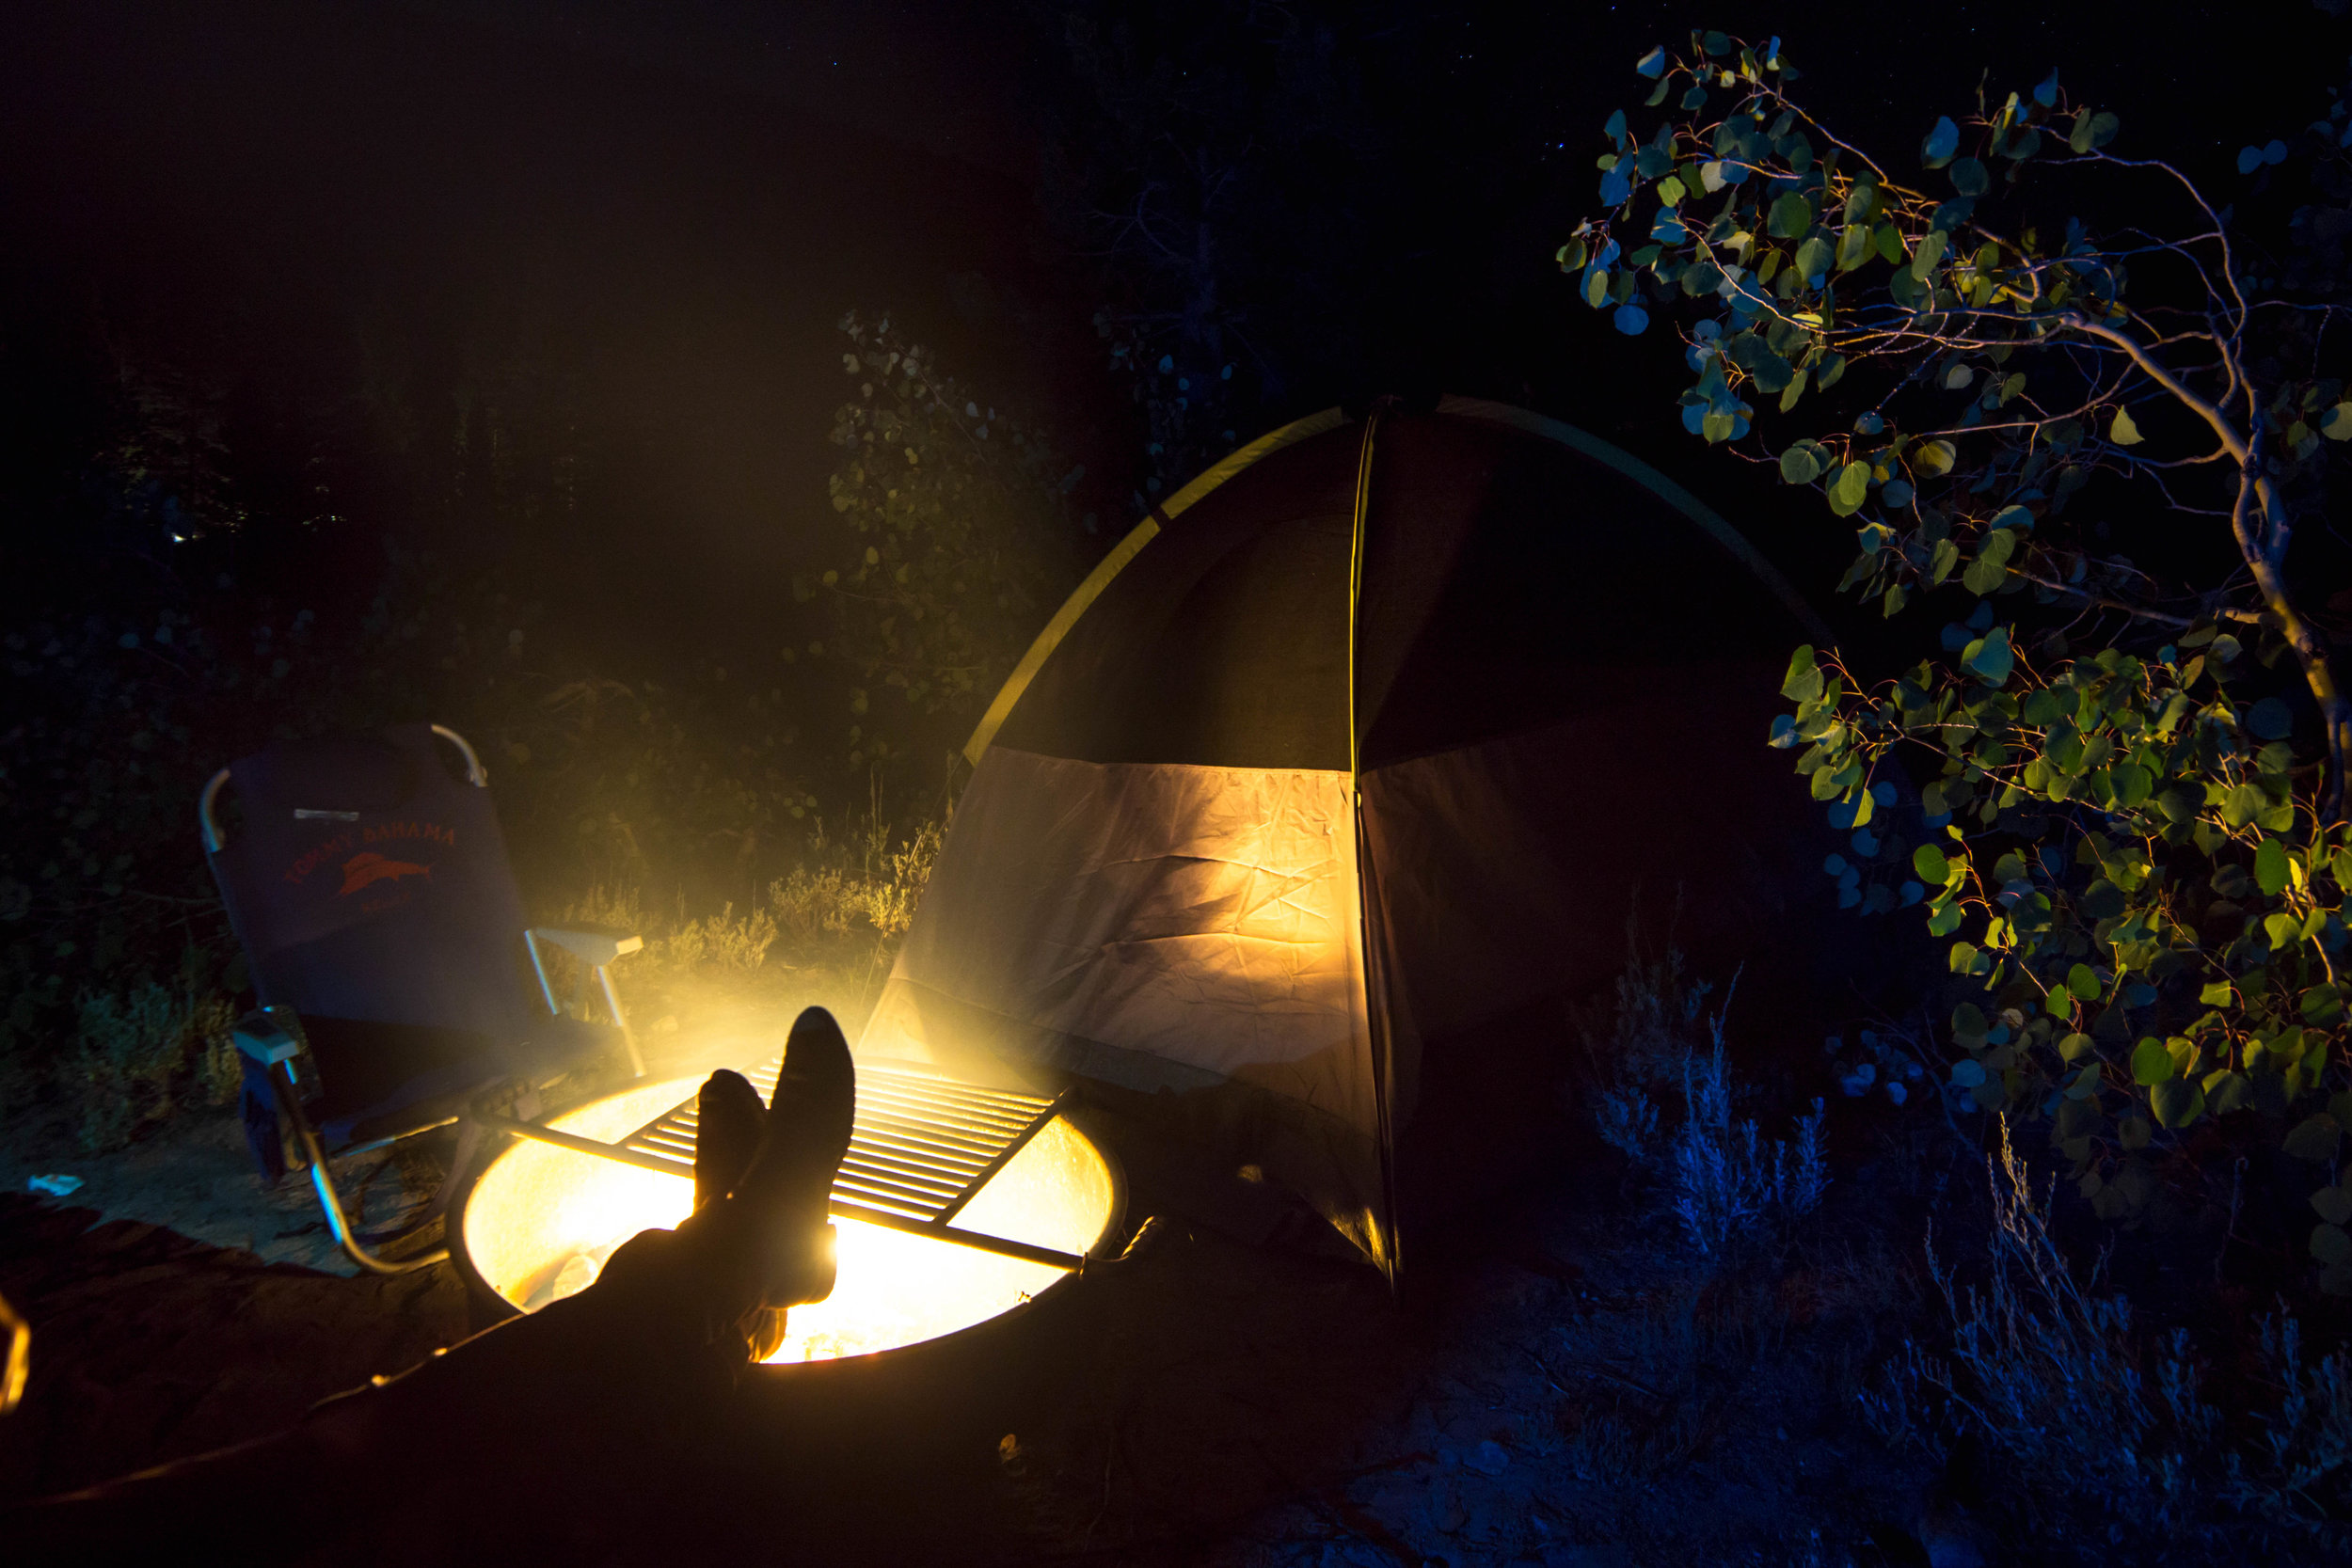 We put our feet up, exchanging stories &amp; listening to the sounds of critters rustling around our camp, cloaked in the shadowy night.